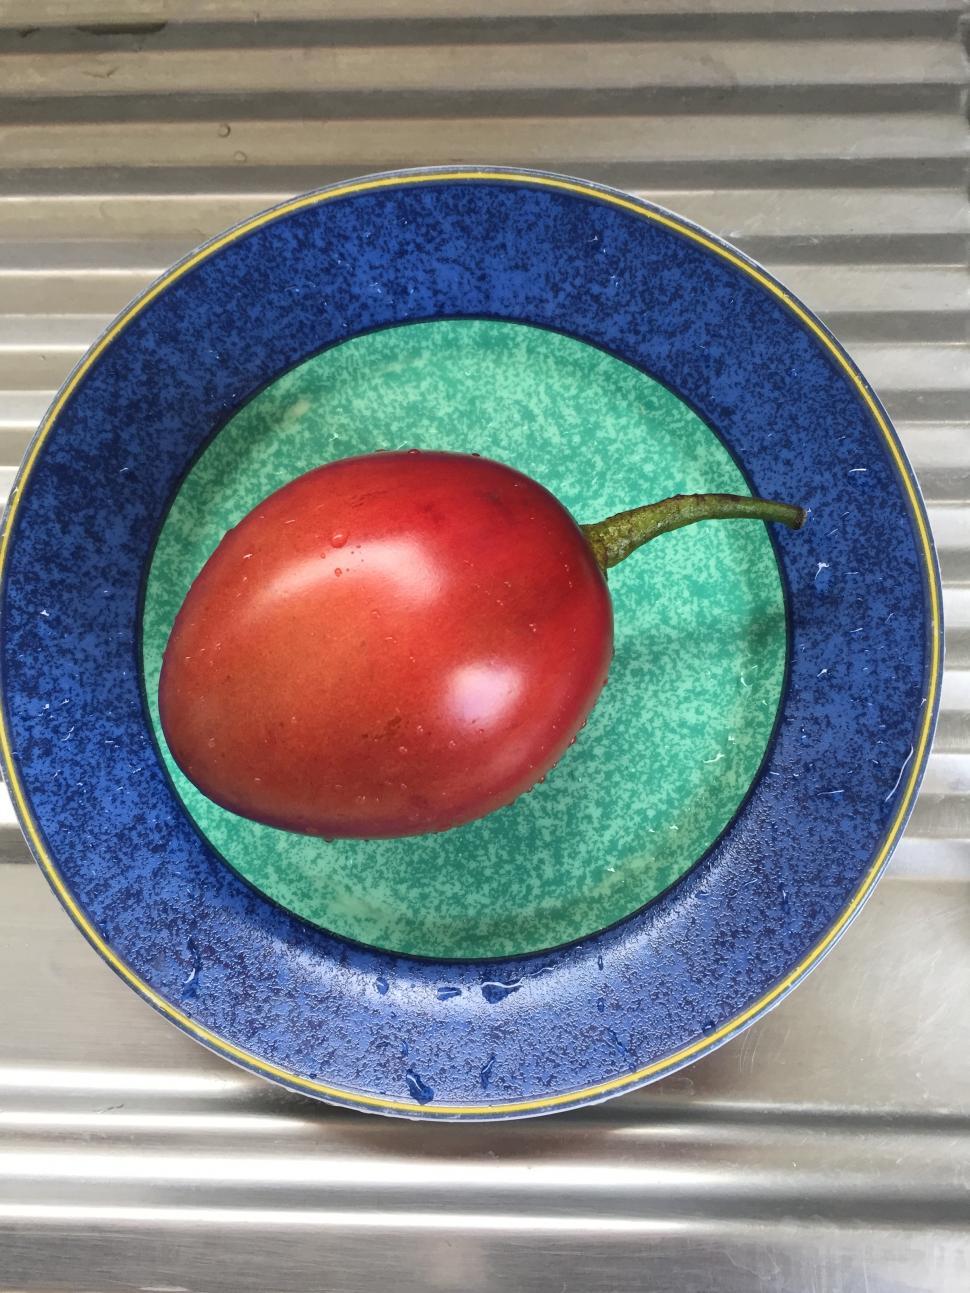 Free Image of Tree Tomato on a Plate  